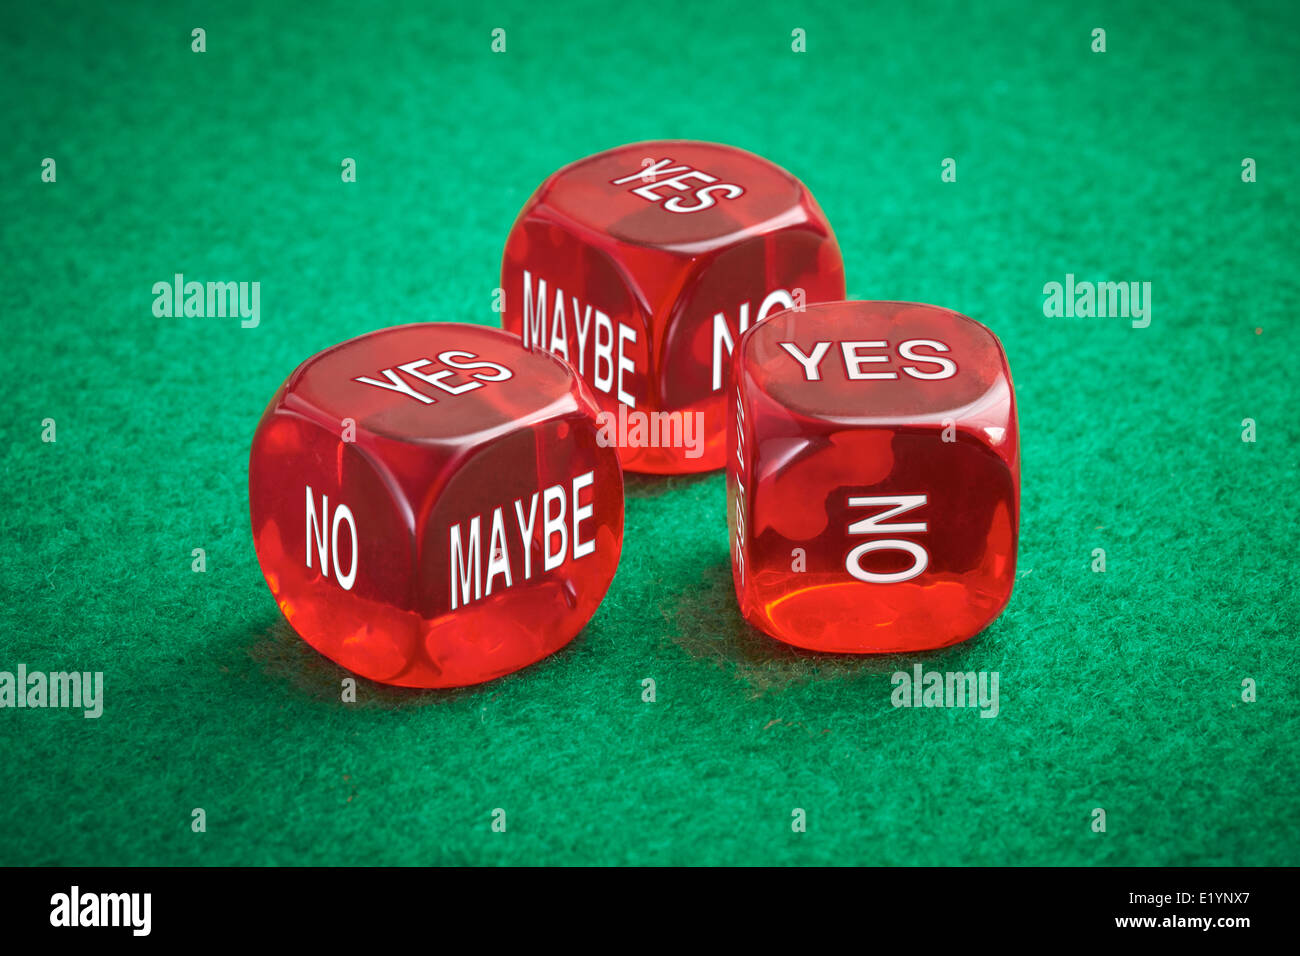 Chance concept, three red dice on a green felt background. Stock Photo